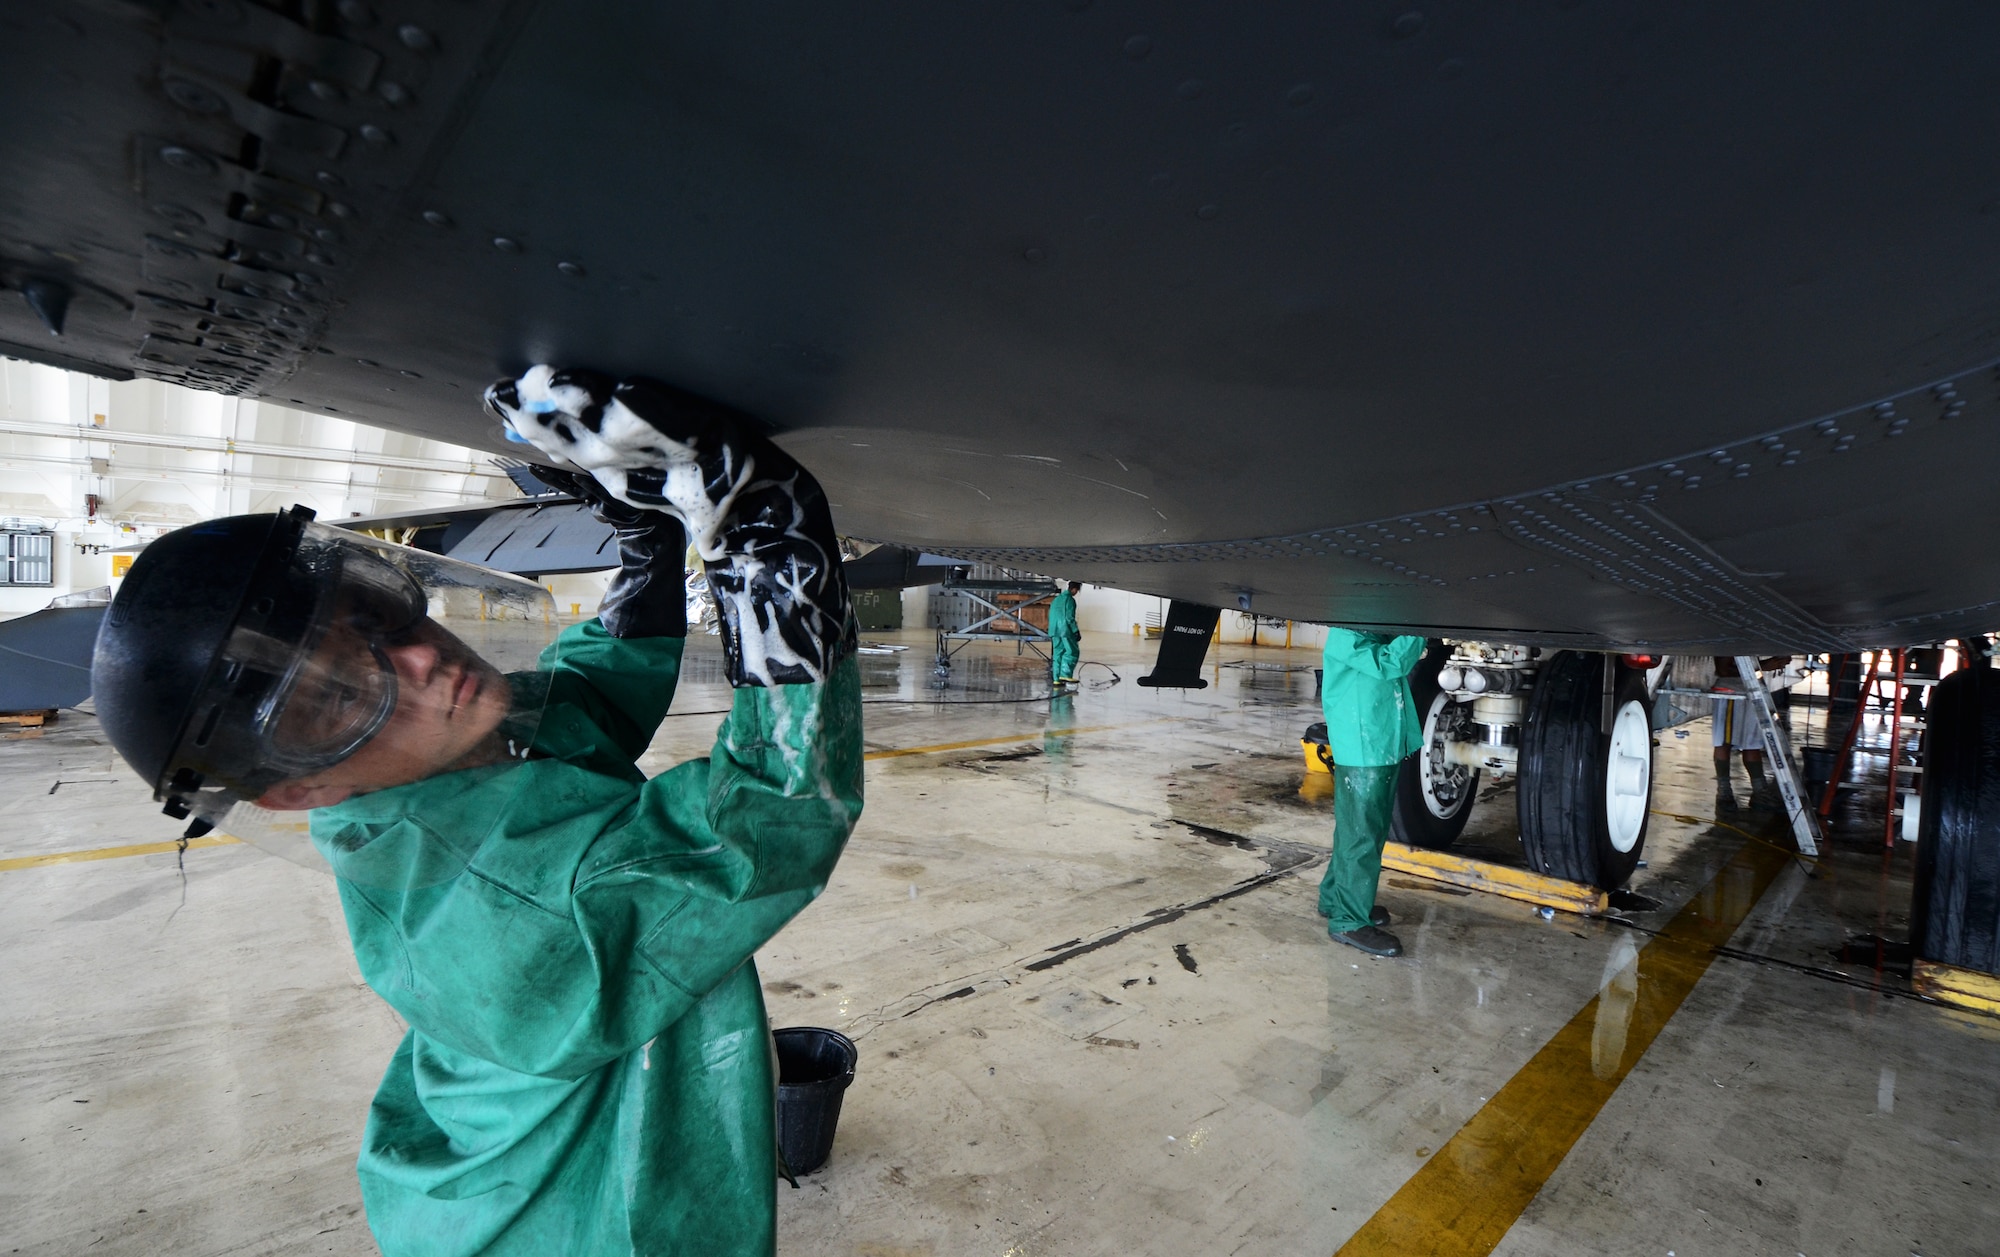 ANDERSEN AIR FORCE BASE, Guam— Airman 1st Class Christopher Rider, 96th Expeditionary Aircraft Maintenance Unit weapons load technician, scrubs the underbelly of a B-52 Stratofortress here, Nov. 15.  Members from the EAMXU take monthly rotations on wash-rack duty. (U.S. Air Force photo by Senior Airman Benjamin Wiseman/Released)